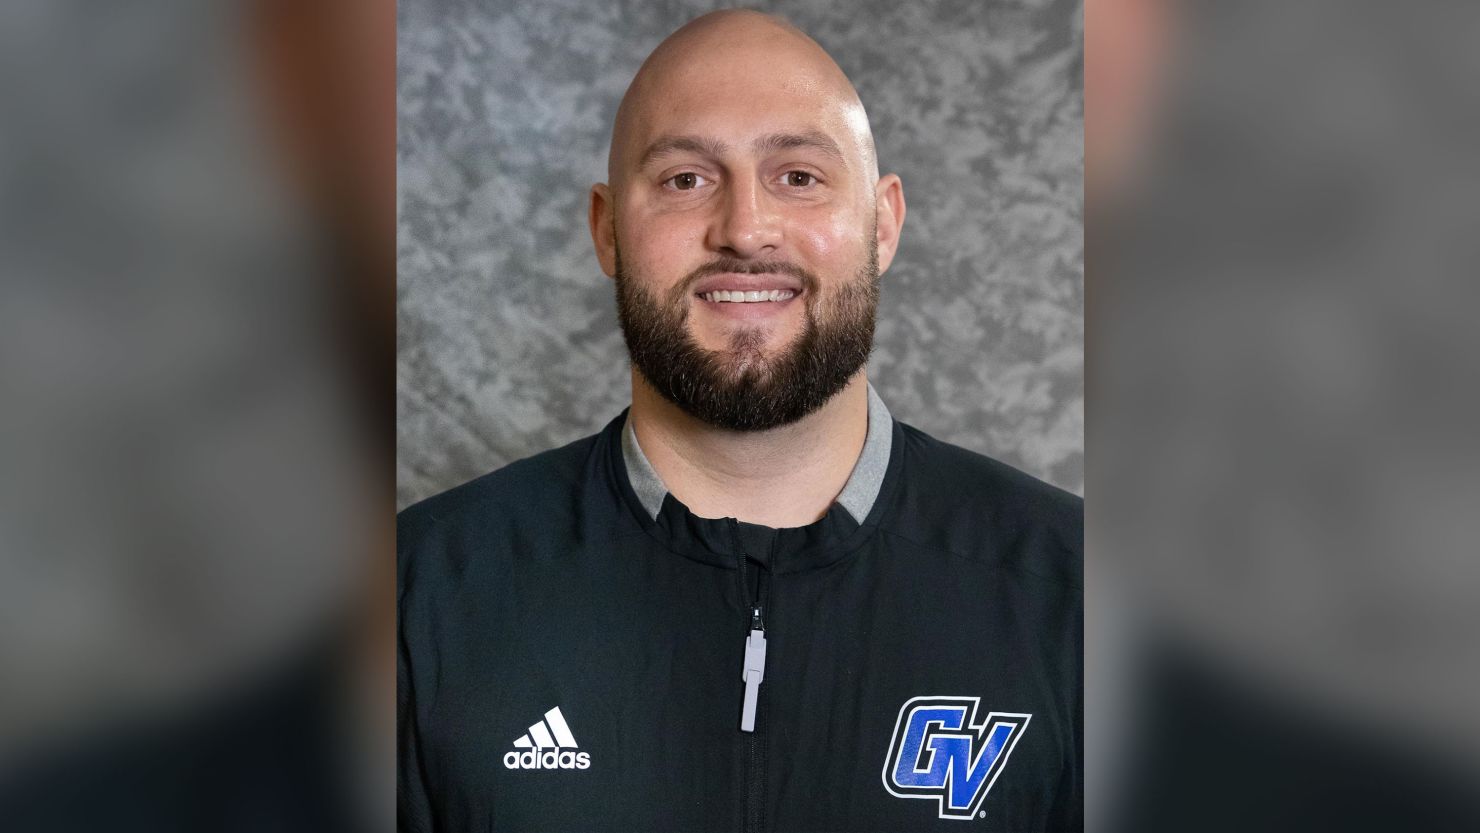 Morris Berger, who'd recently been hired as Grand Valley State University's football offensive coordinator, is under investigation by the university for saying he'd eat dinner with Hitler in an interview with the college newspaper. 